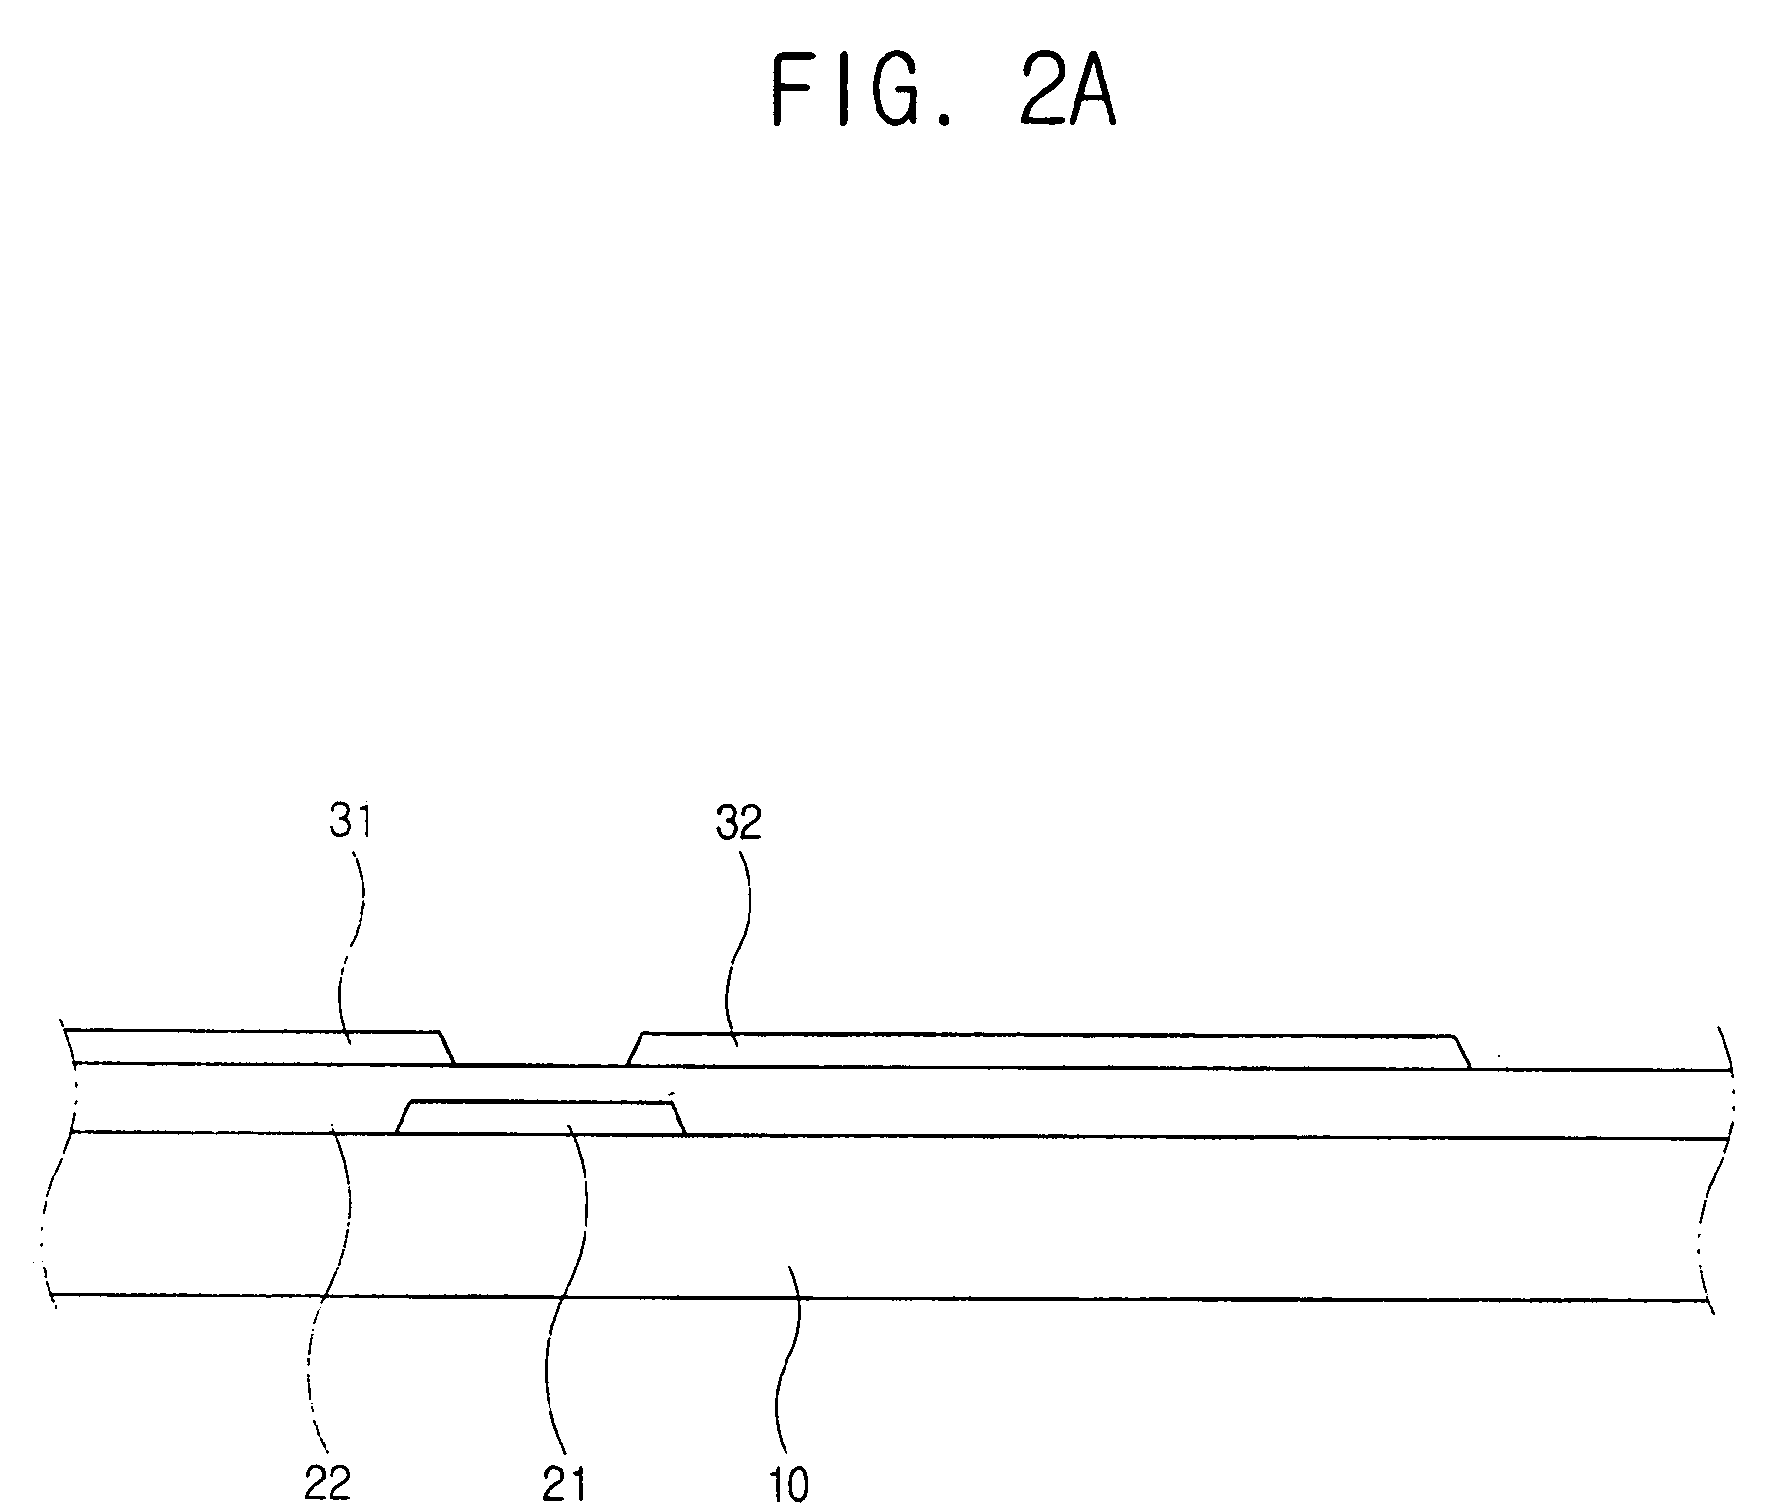 Thin film transistor substrate and method of making the same